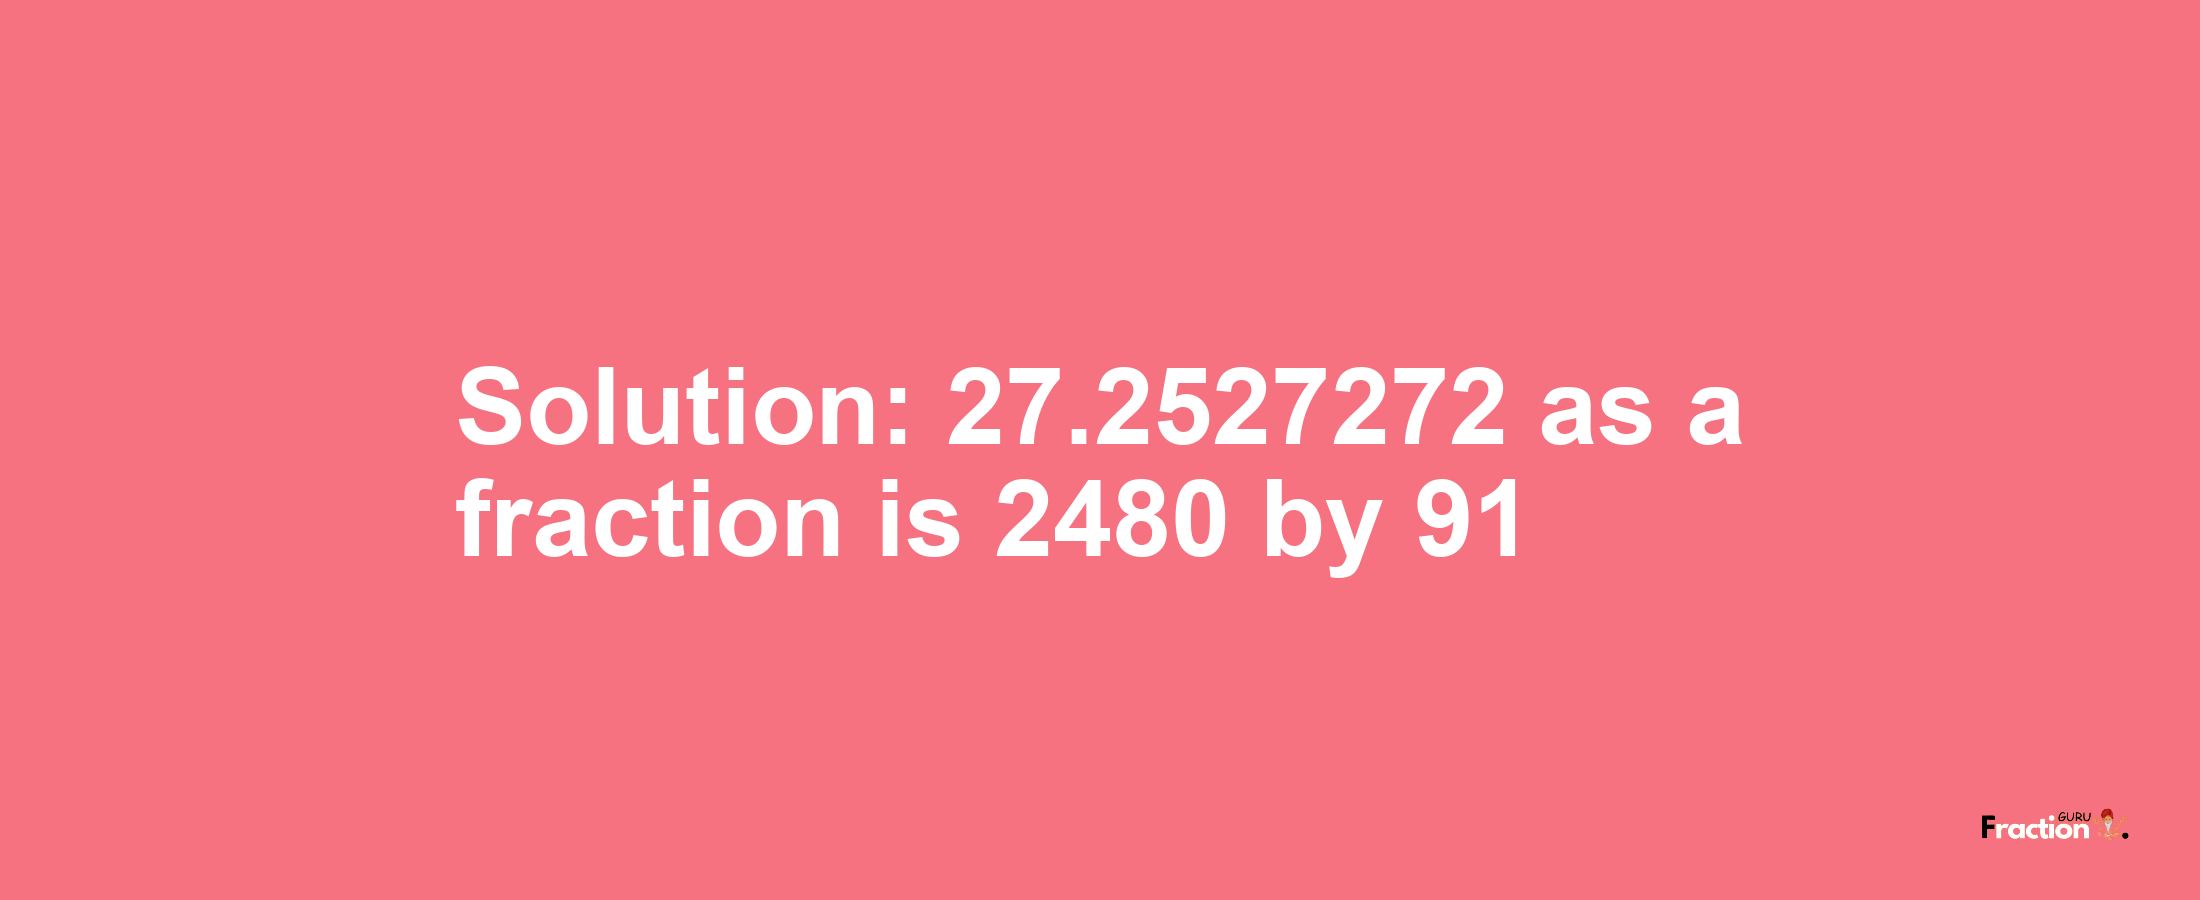 Solution:27.2527272 as a fraction is 2480/91